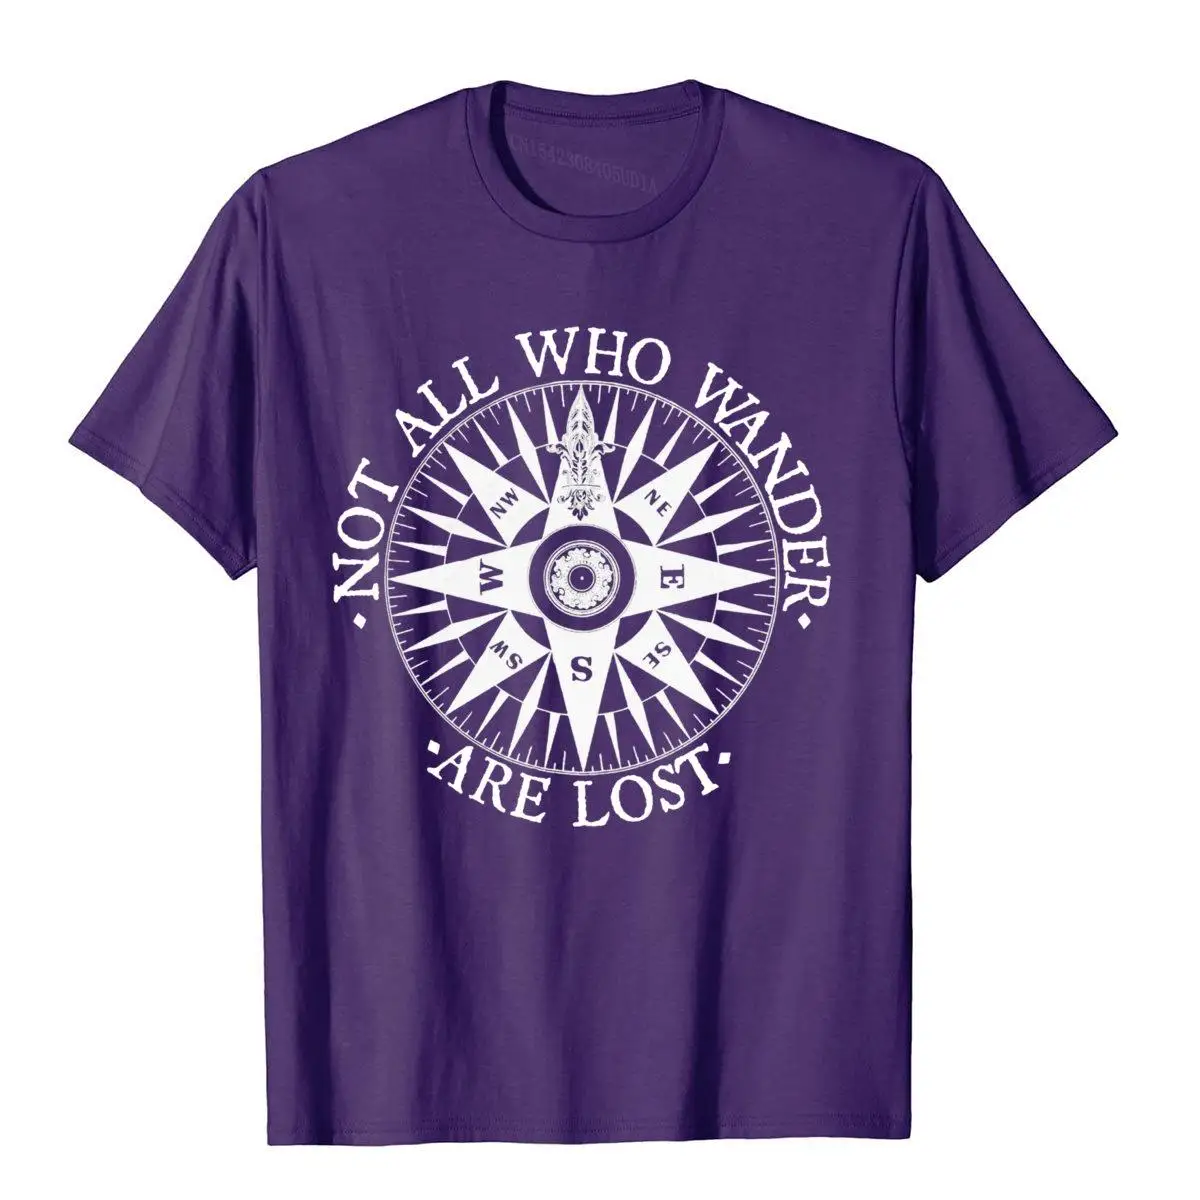 Not All Who Wander Are Lost T-shirt Traveler Tee for Nomads__97A1748purple